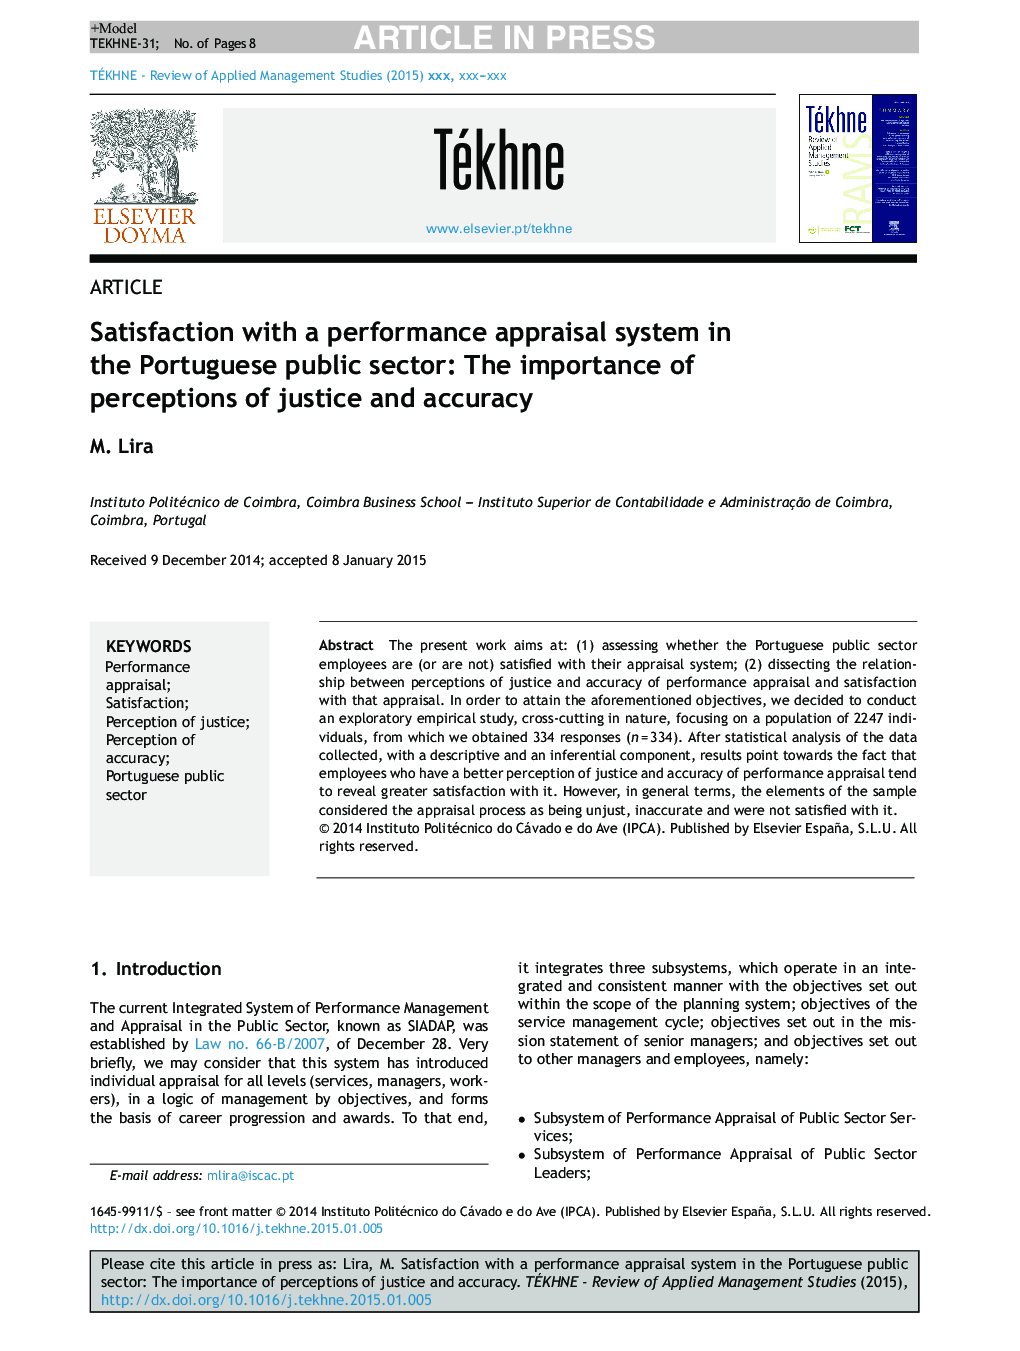 Satisfaction with a performance appraisal system in the Portuguese public sector: The importance of perceptions of justice and accuracy